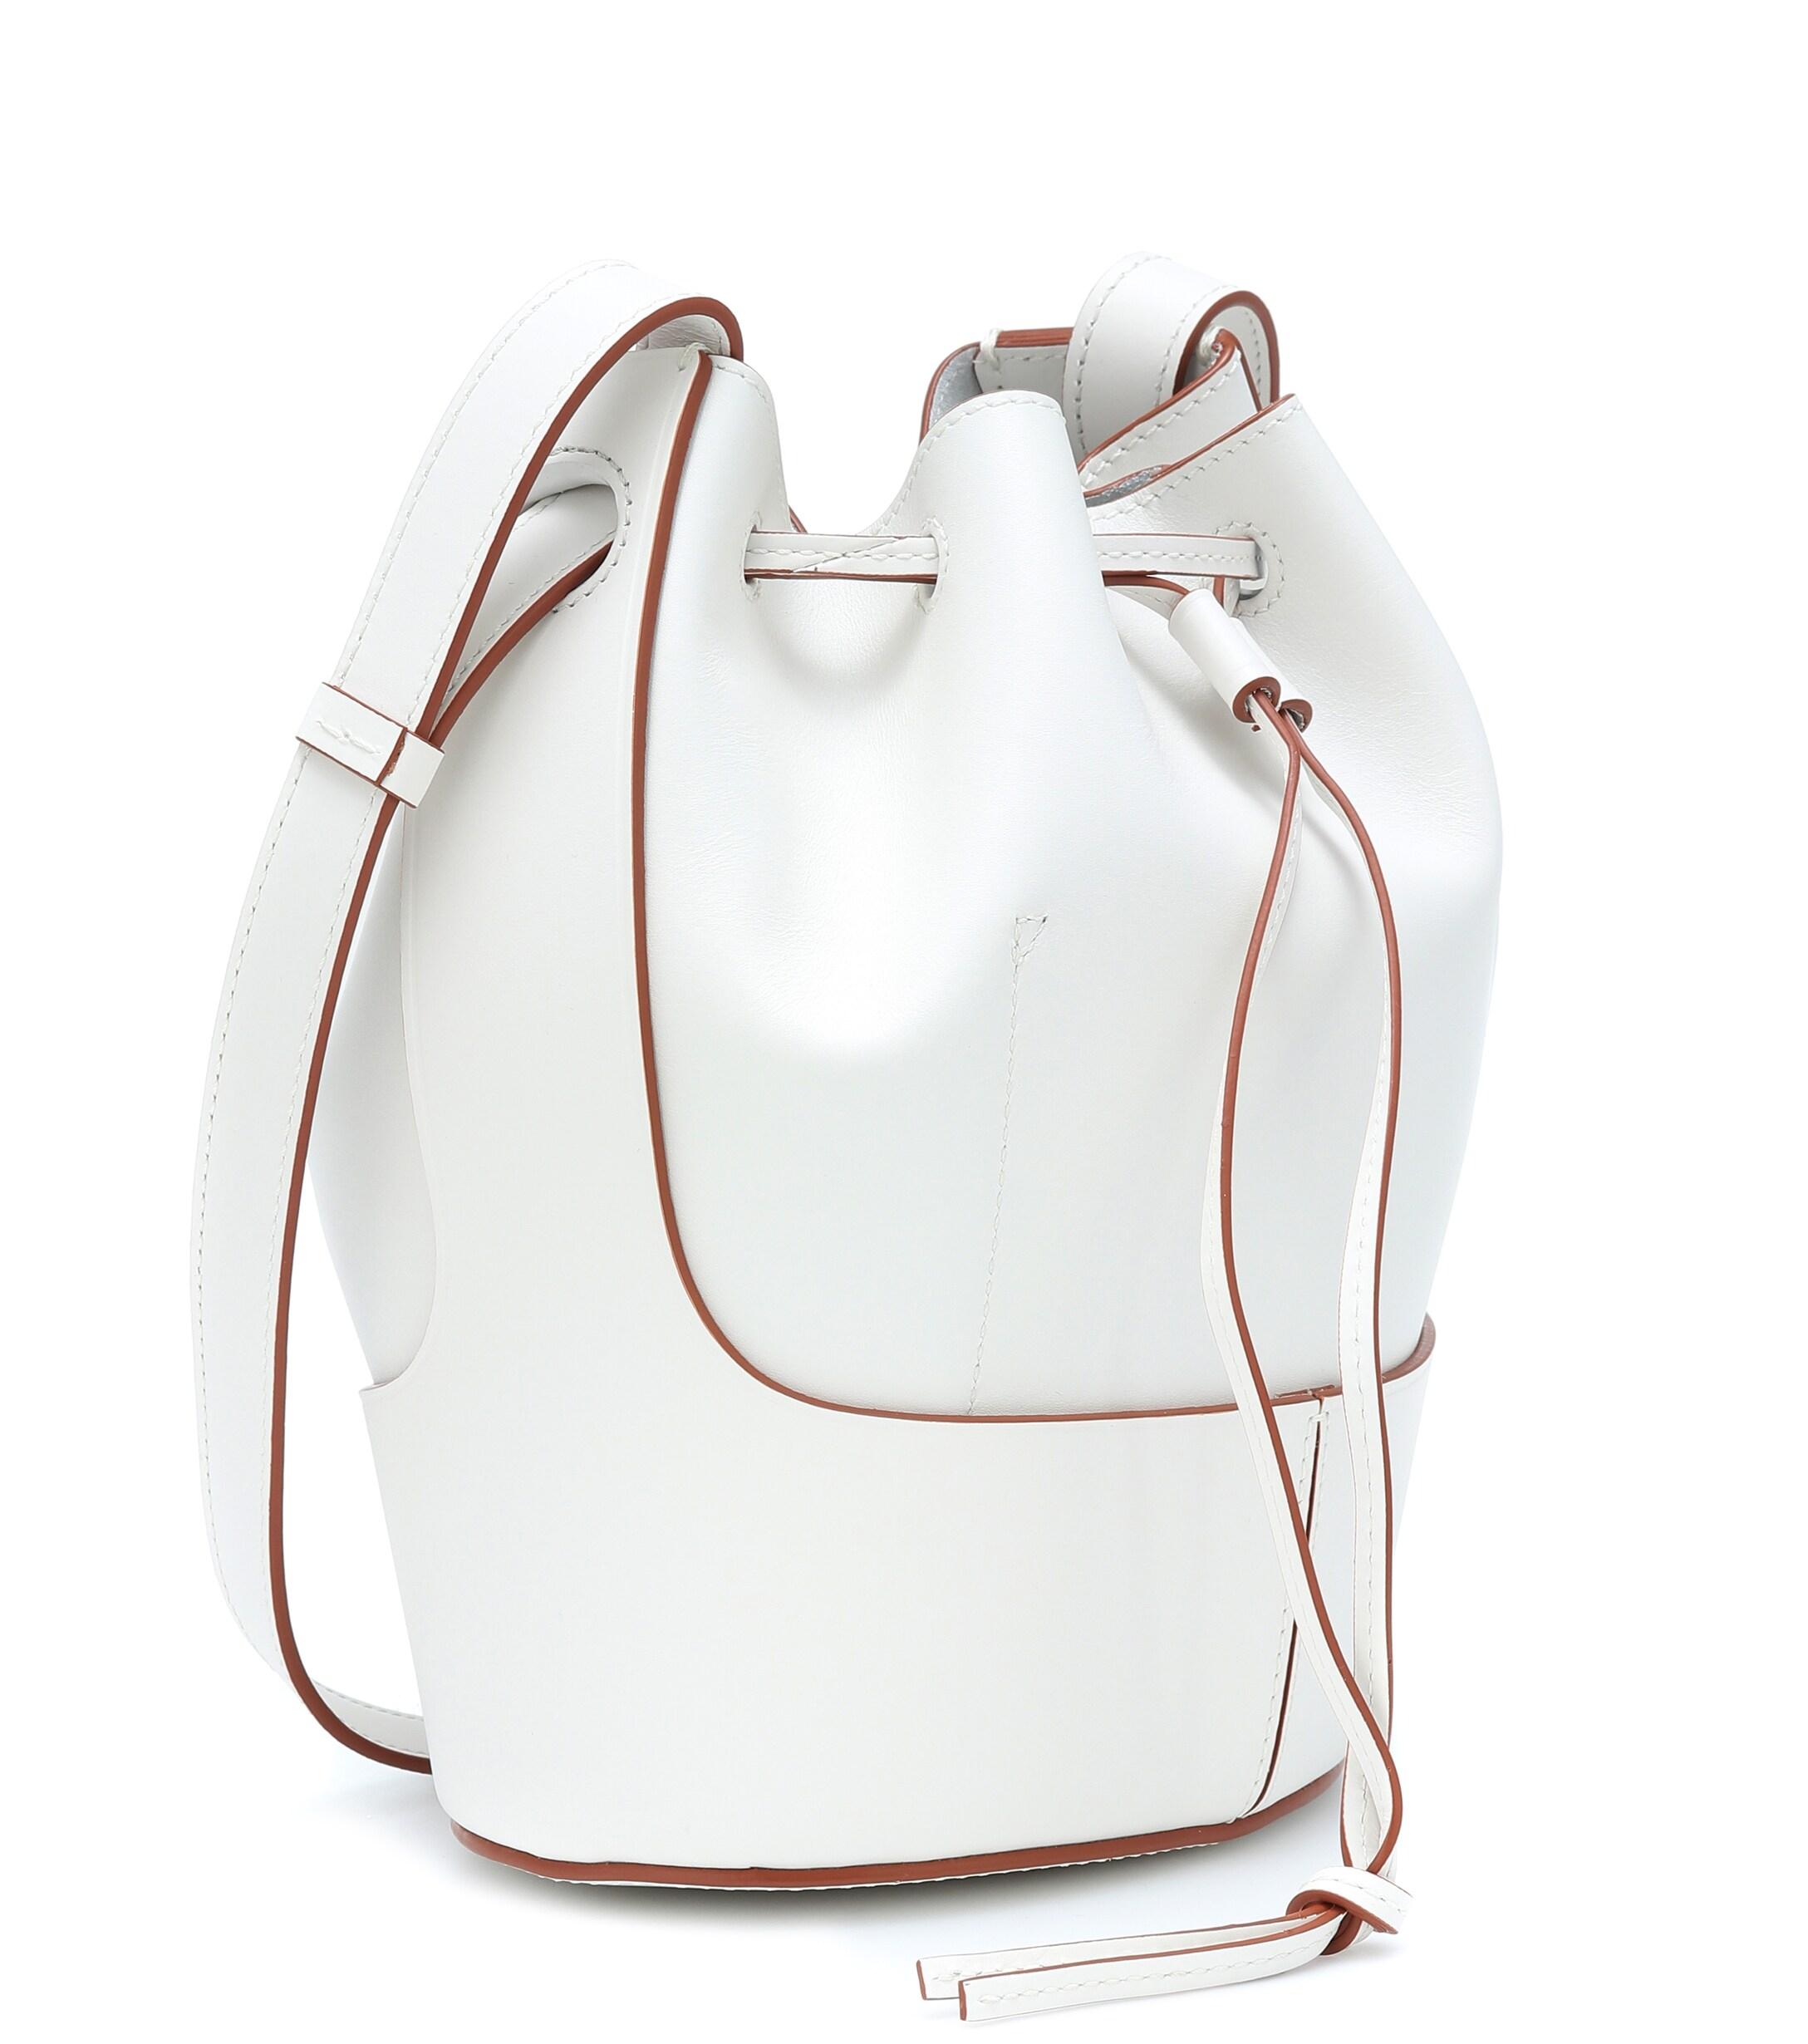 Loewe White Balloon Small Leather Shoulder Bag